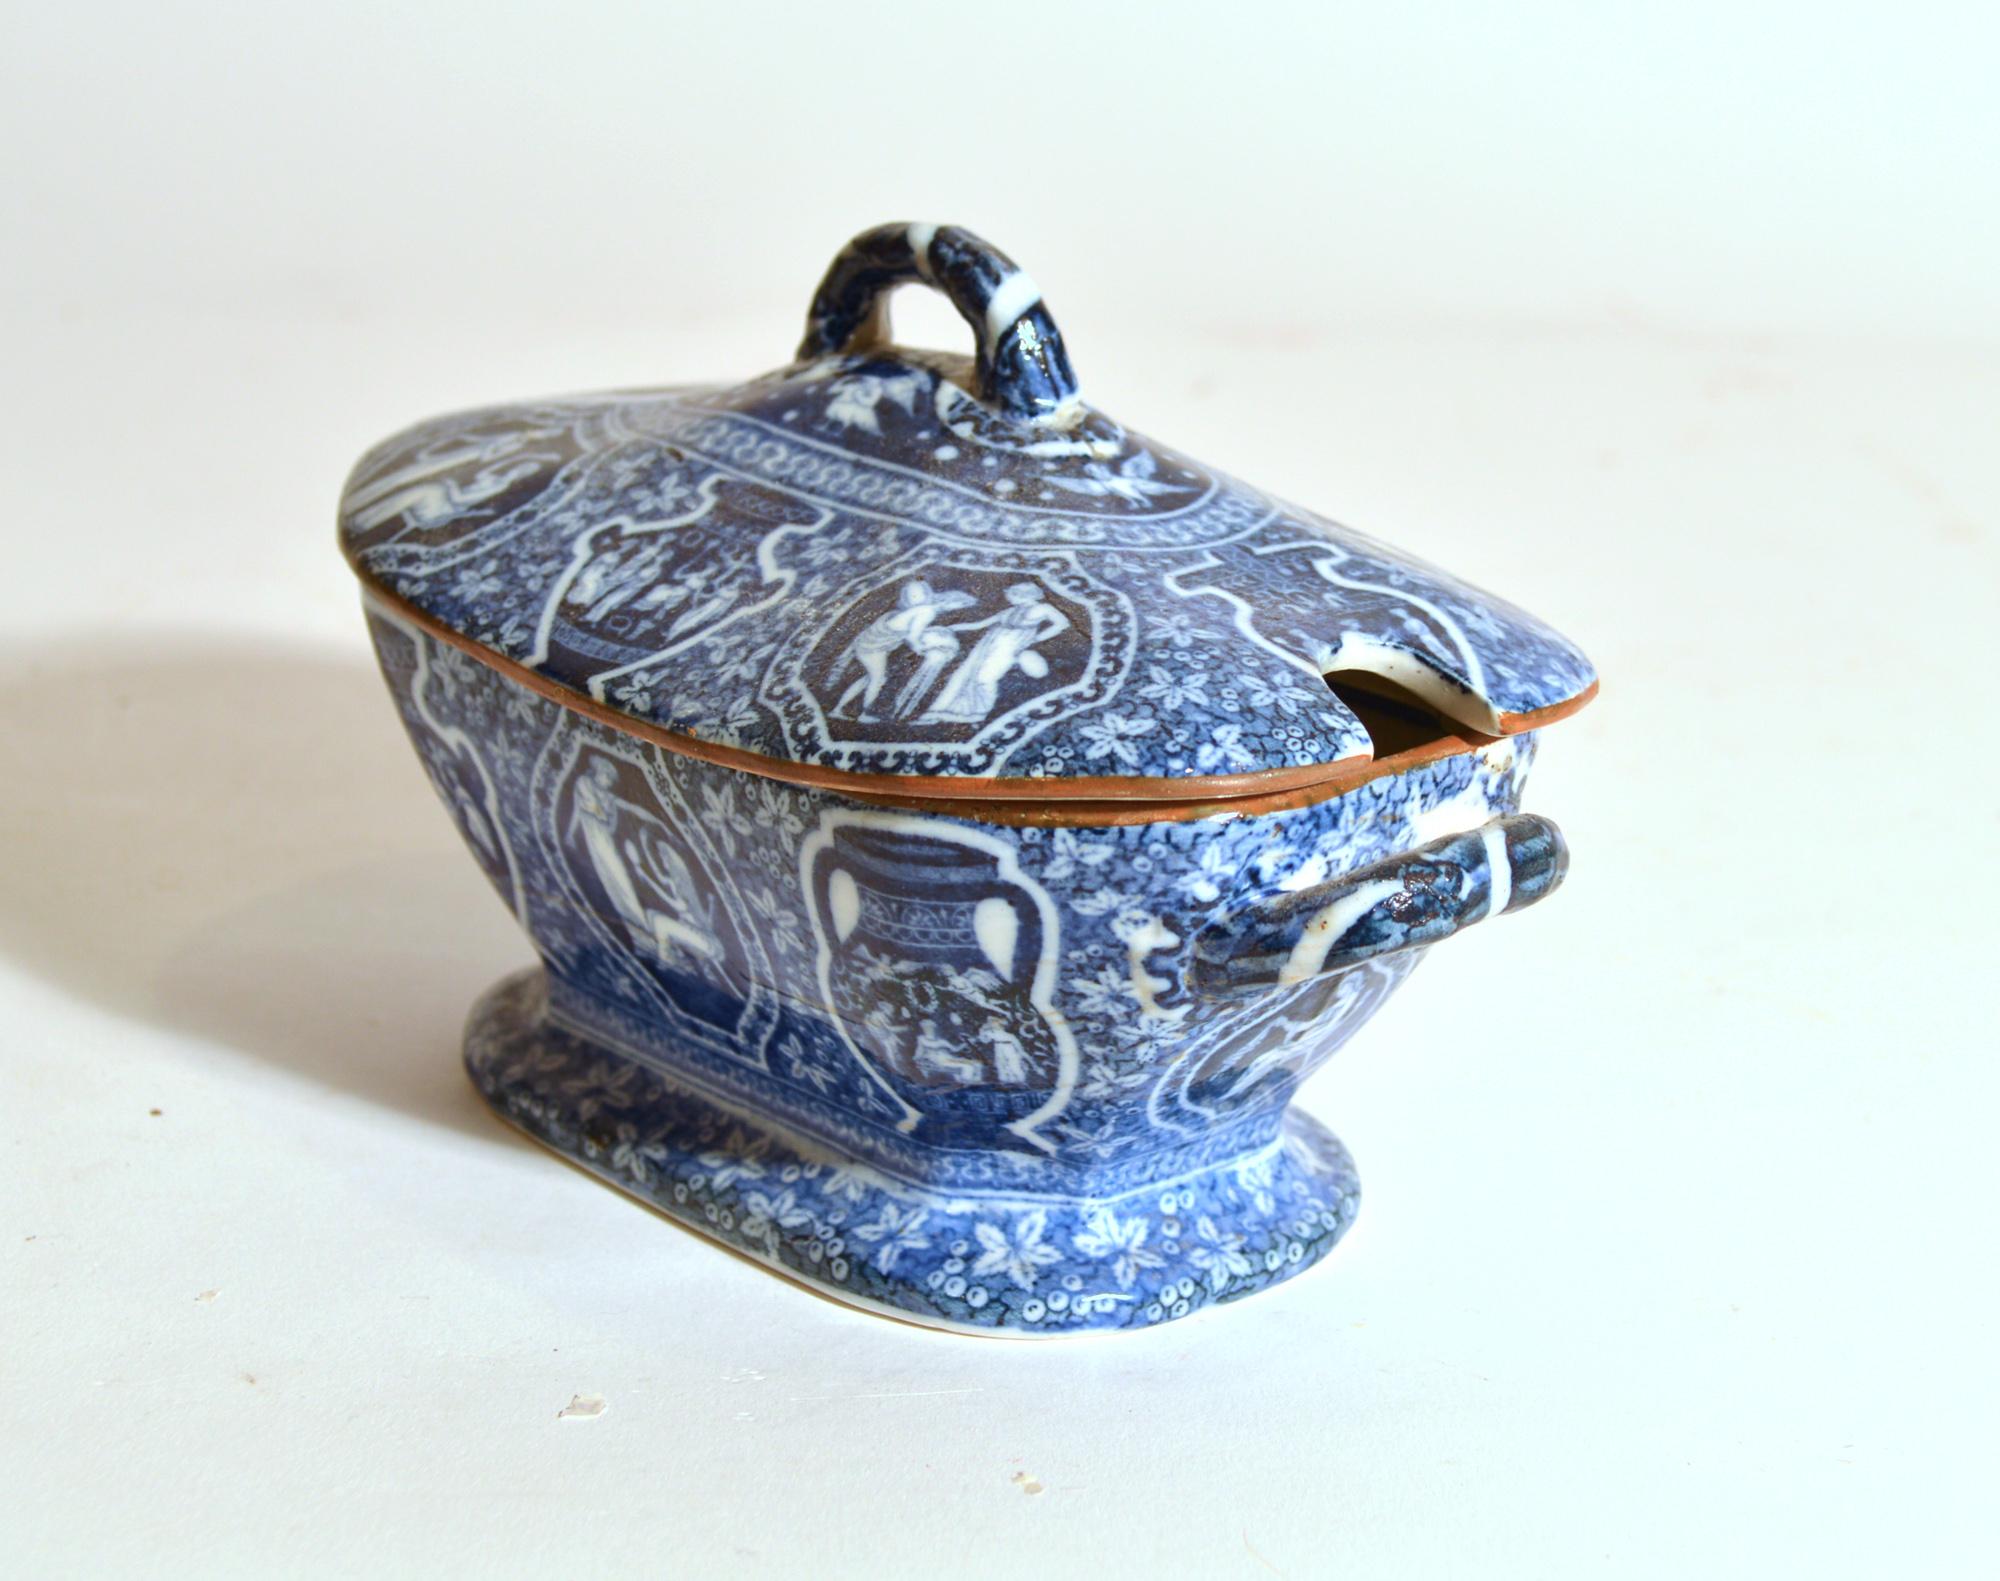 Copeland-Late Spode Neo-Classical Greek Pattern Blue Sauce Tureen & Cover,
circa 1847.

From a large collection of Greek Pattern Objects- please inquire about other pieces- plates, soups, tureens, dishes, etc.

The Spode pottery sauce tureen &